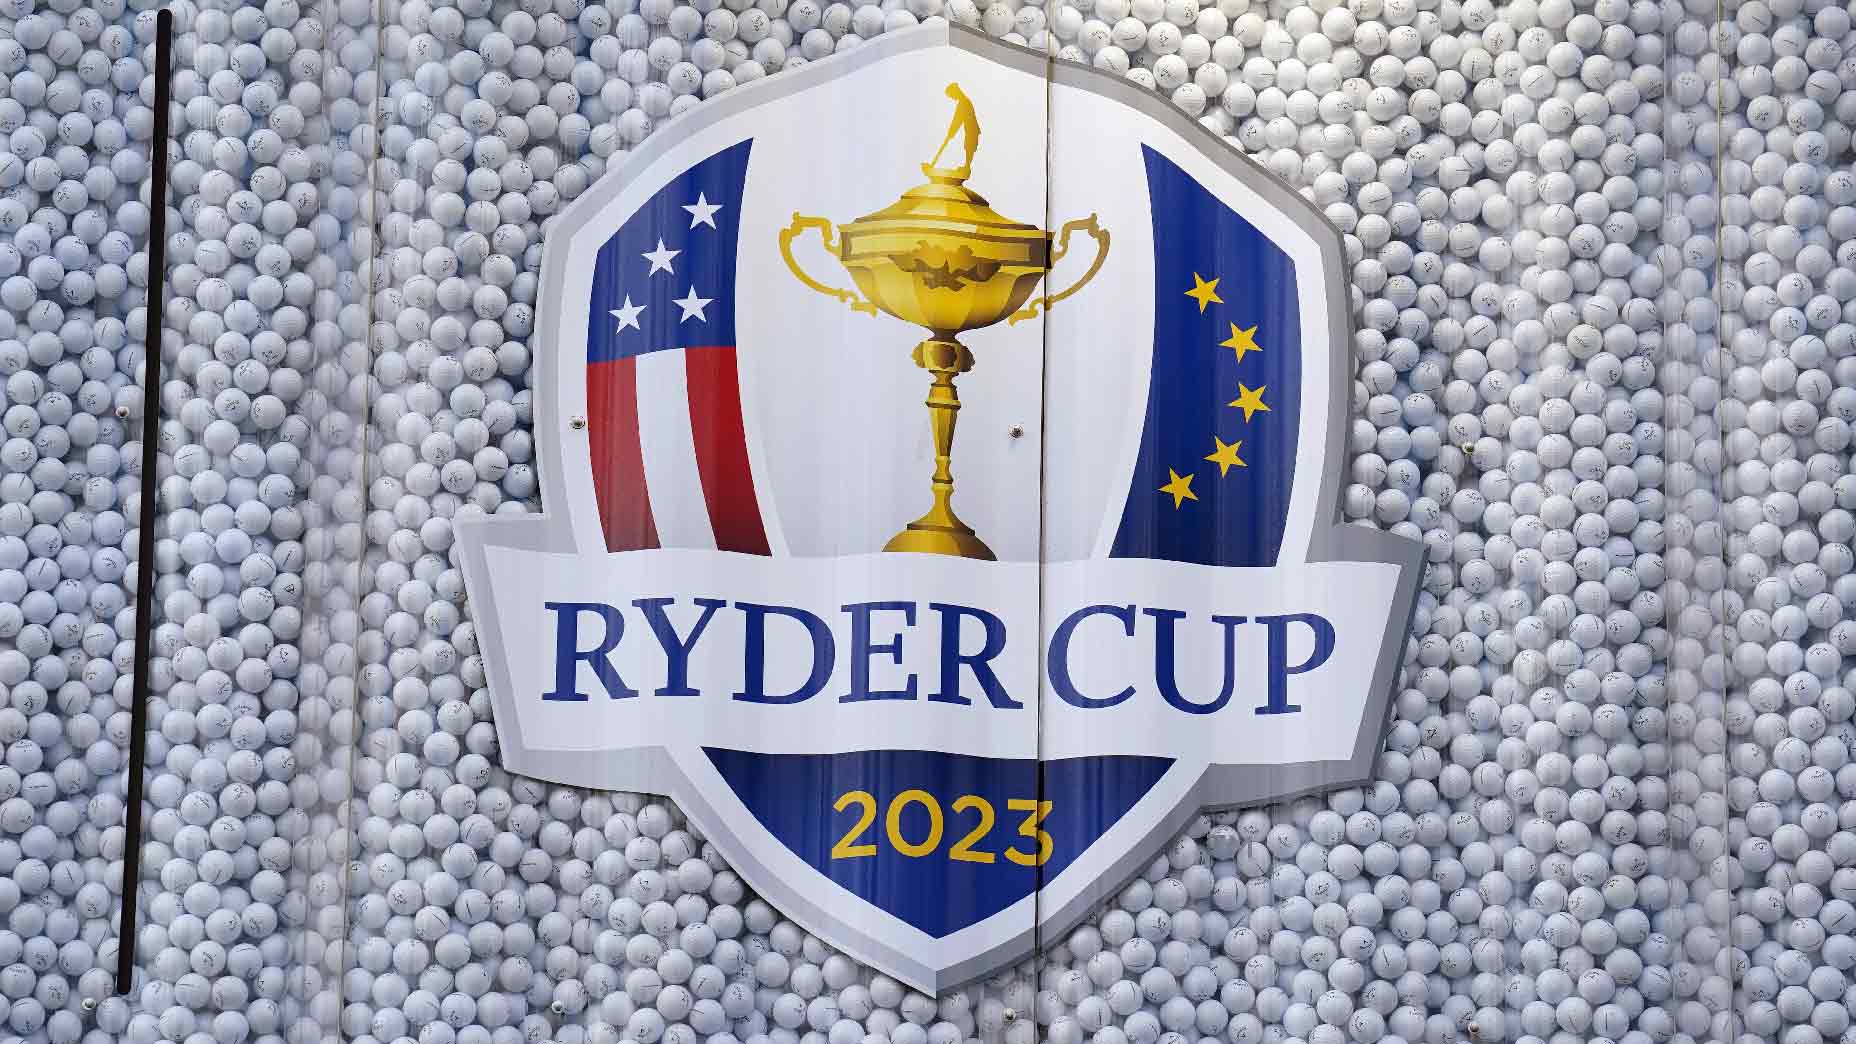 The 2023 Ryder Cup logo in front of golf balls